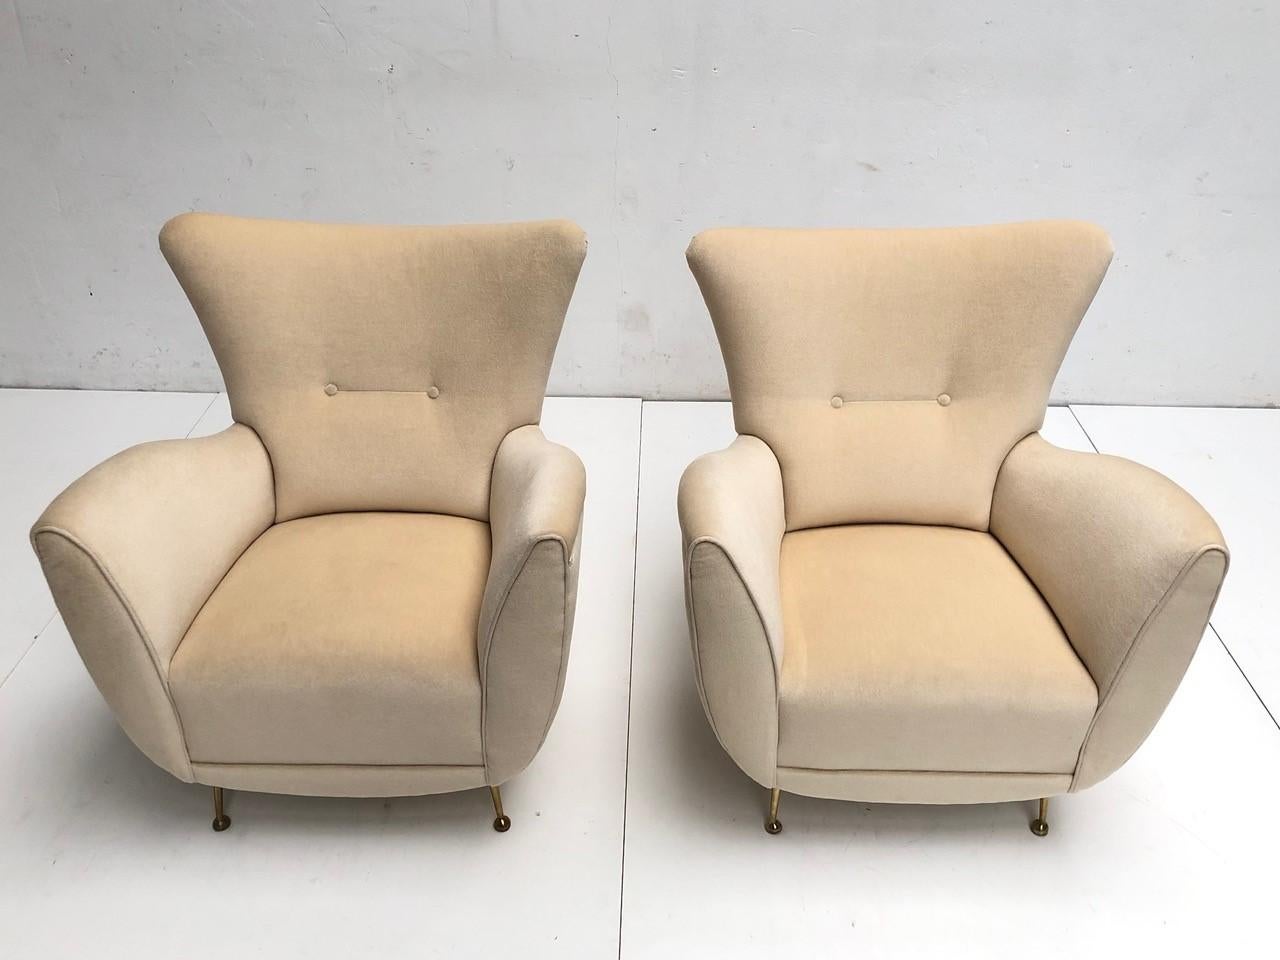 Sculptural Form Lounge Chairs, Mohair Fabric with Brass Legs, ISA, Italy, 1950 In Good Condition For Sale In bergen op zoom, NL